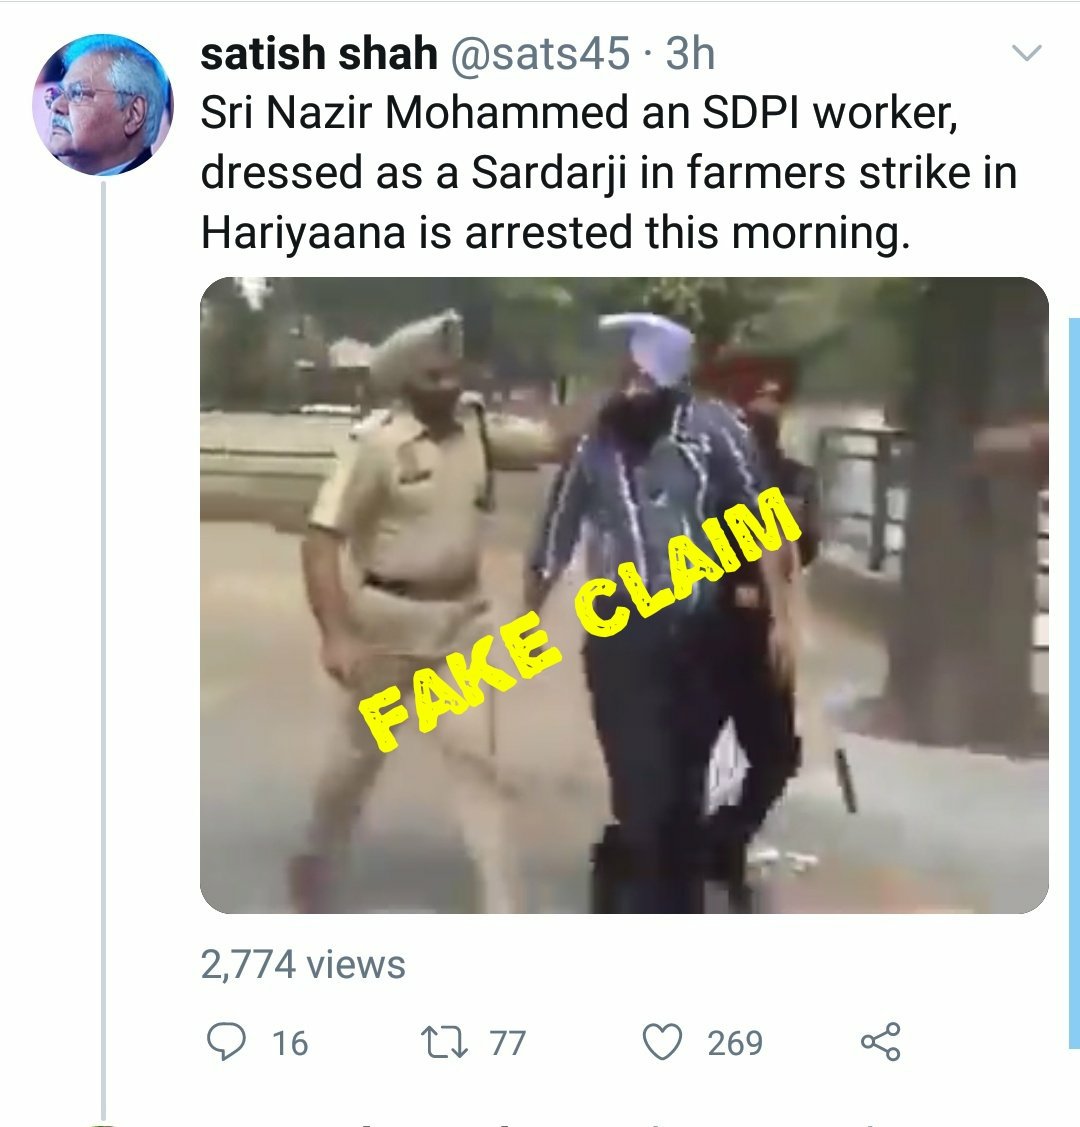 A video of Sikh man's turban removed by cop during 2011 protests by retrenched rural veterinary pharmacists in Mohali was revived with the false claim that SDPI's 'Nazir Mohammed' disguised as Sikh at farmers' protest.  #AltNewsFactCheck 6/n https://www.altnews.in/2011-video-revived-with-false-claim-that-muslim-man-wore-sikh-turban-during-farmer-protest/?utm_source=website&utm_medium=social-media&utm_campaign=newpost